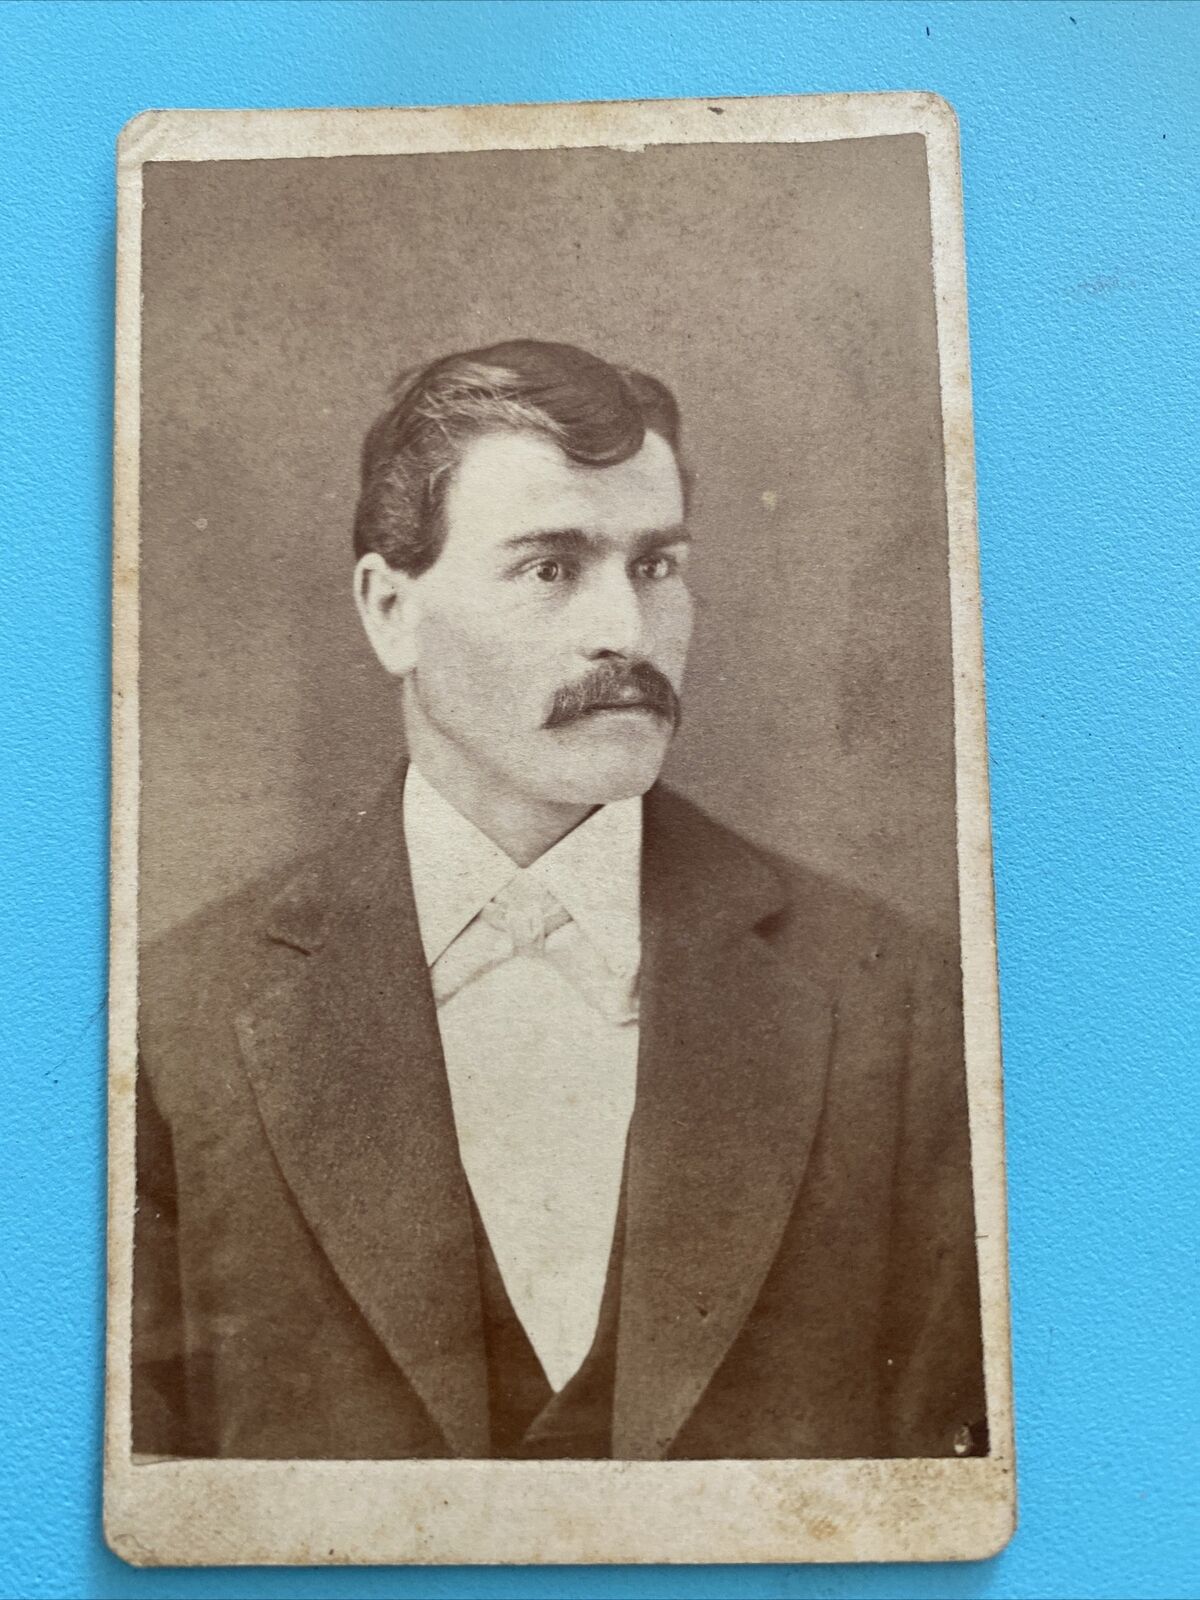 ANTIQUE CDV C. 1880s C.B. SCHUMAKER HANDSOME YOUNG MAN WITH MUSTACHE GALION OHIO